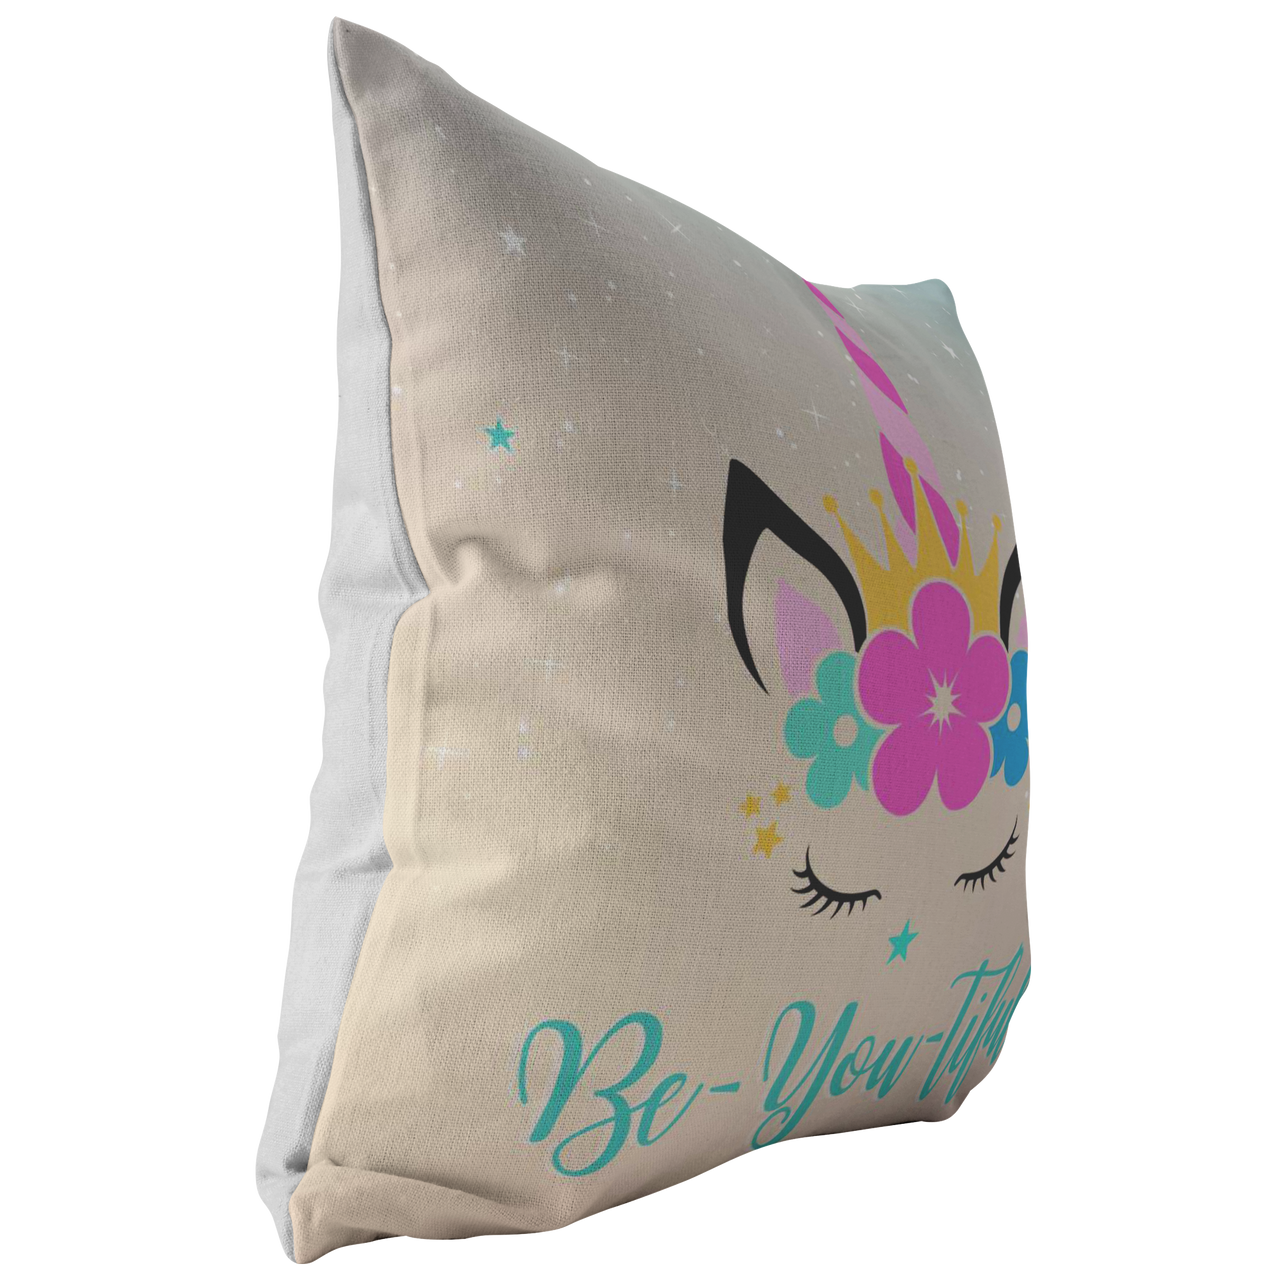 The Be-YOU-tiful Unicorn Pillow - Pink/Turquoise